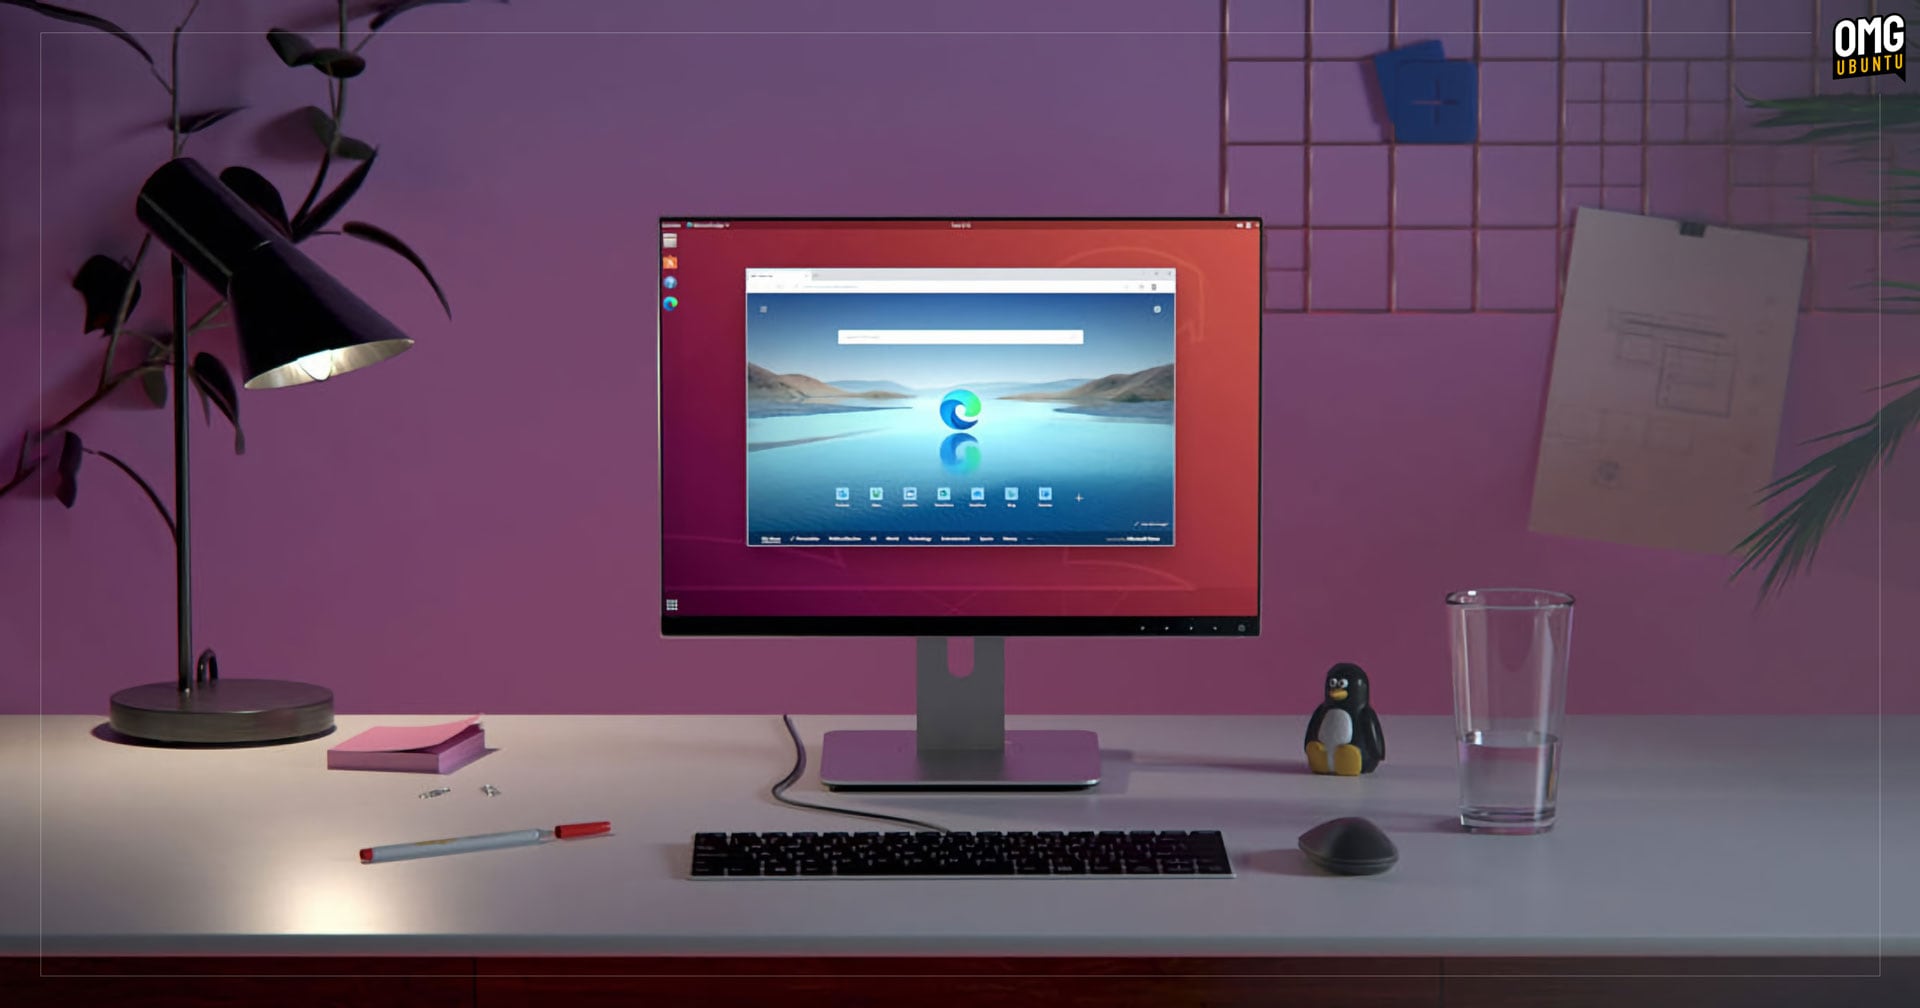 Microsoft Edge for Linux released, how to install